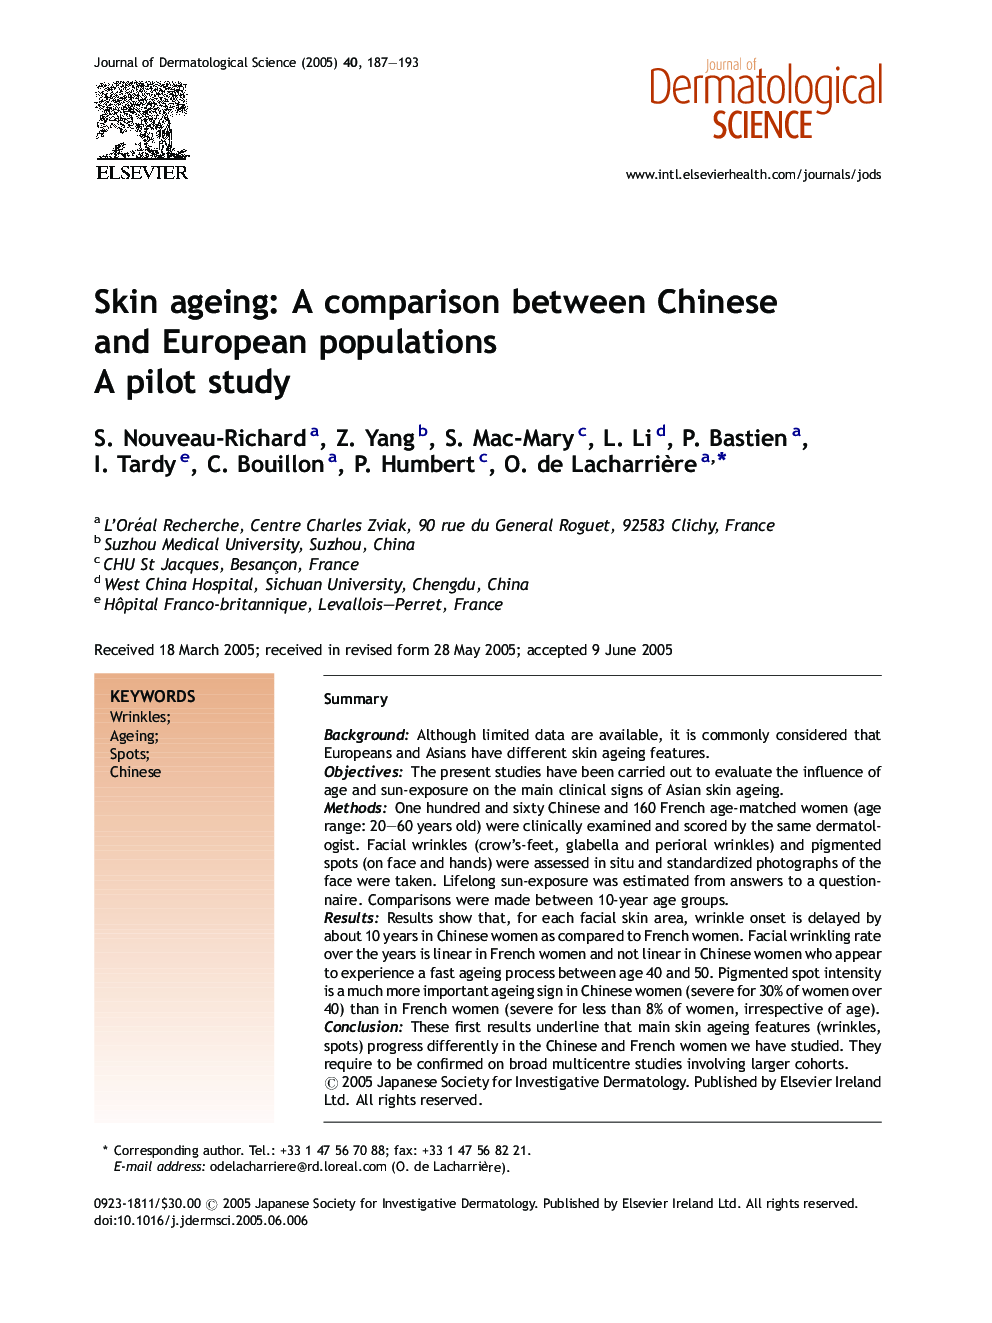 Skin ageing: A comparison between Chinese and European populations